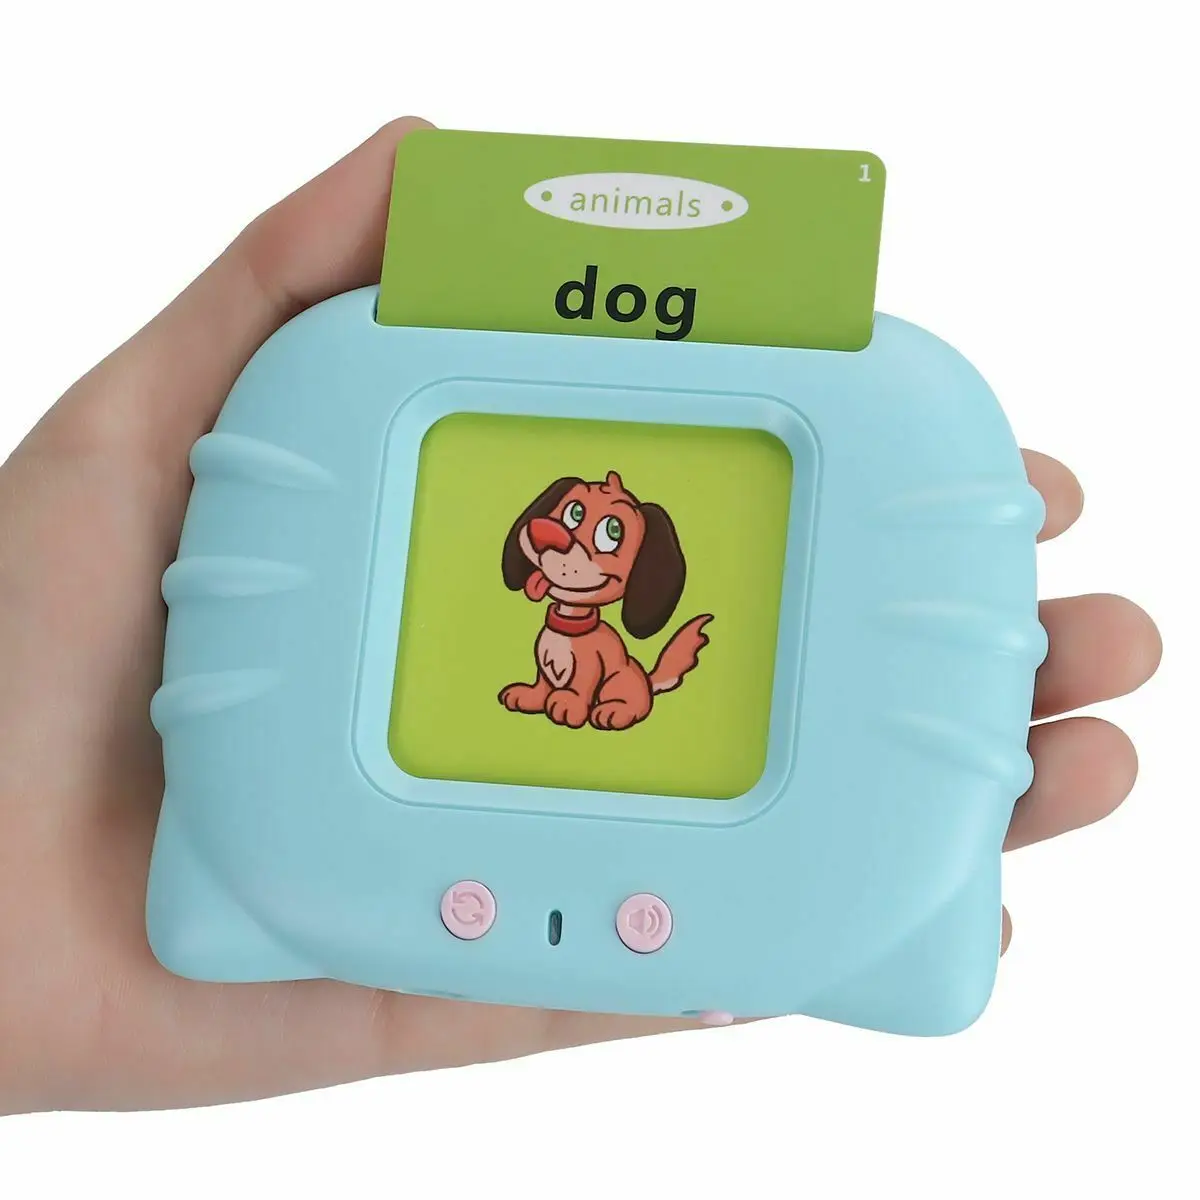 Funny plug in card Language learning machine Bilingual Card Learning Machine Early Education with flash card for kids (1600461508141)